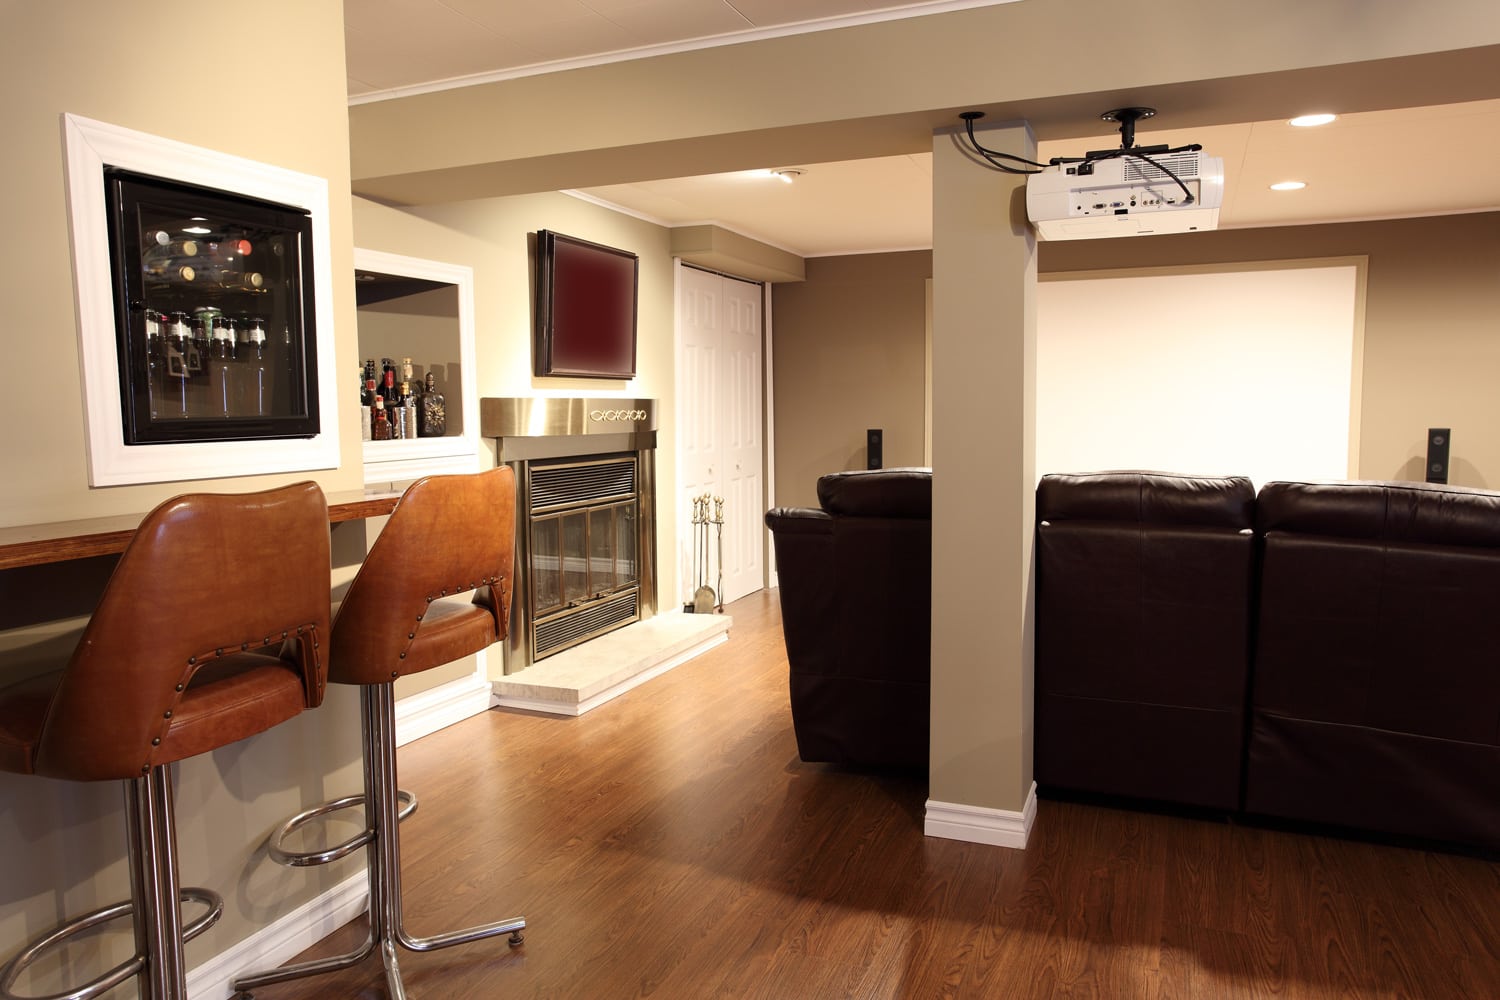 A DSLR photo of a Modern living room located in the basement of a bungalow with a wooden floor, a bar, mimi fridge and fournitures. 